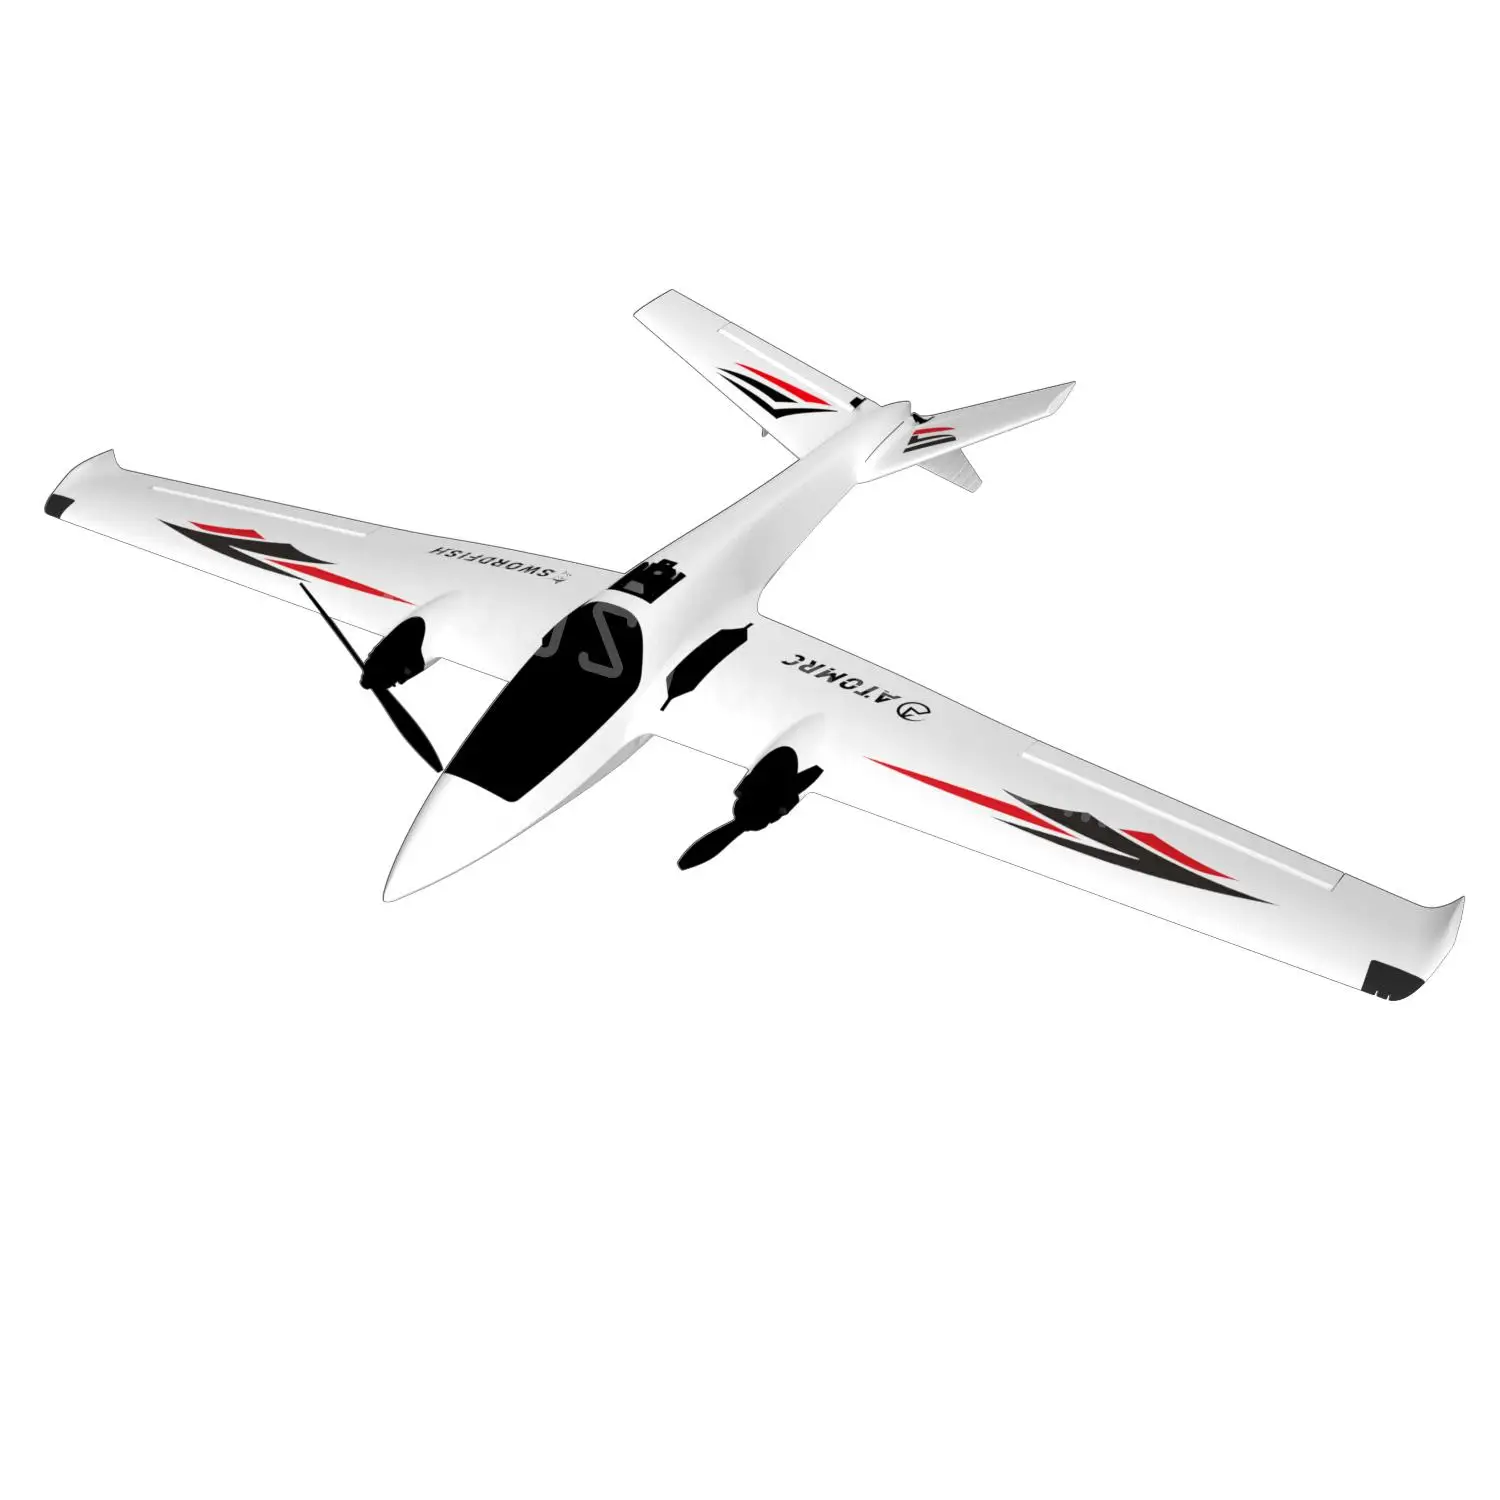 ATOMRC Swordfish 1200mm Fixed Wing Wingspan FPV Aircraft RC Airplane KIT PNP FPV PNP Outdoor Toys for Children RC Model